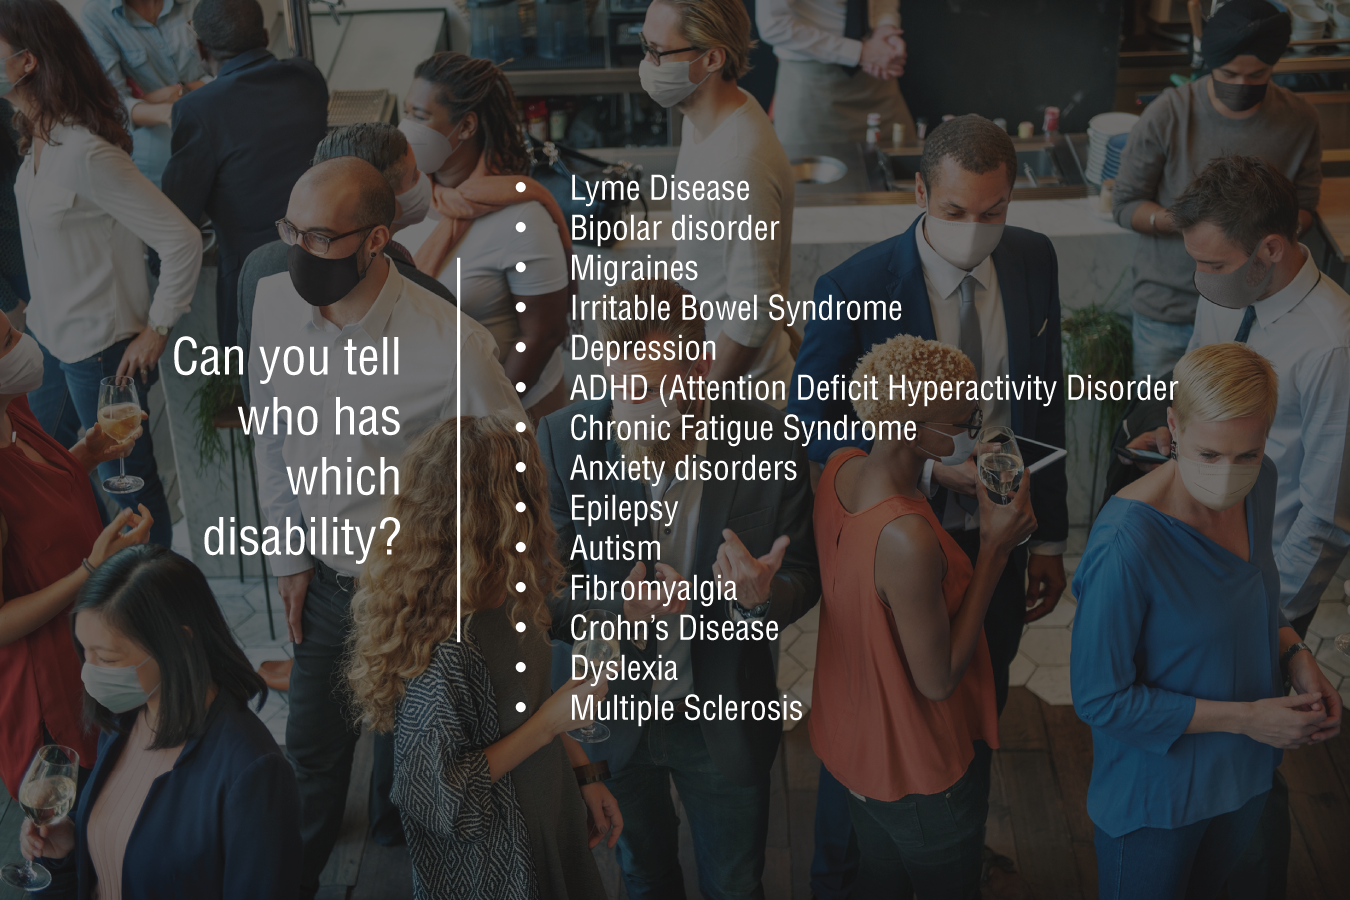 An illustration of the list of disabilities.